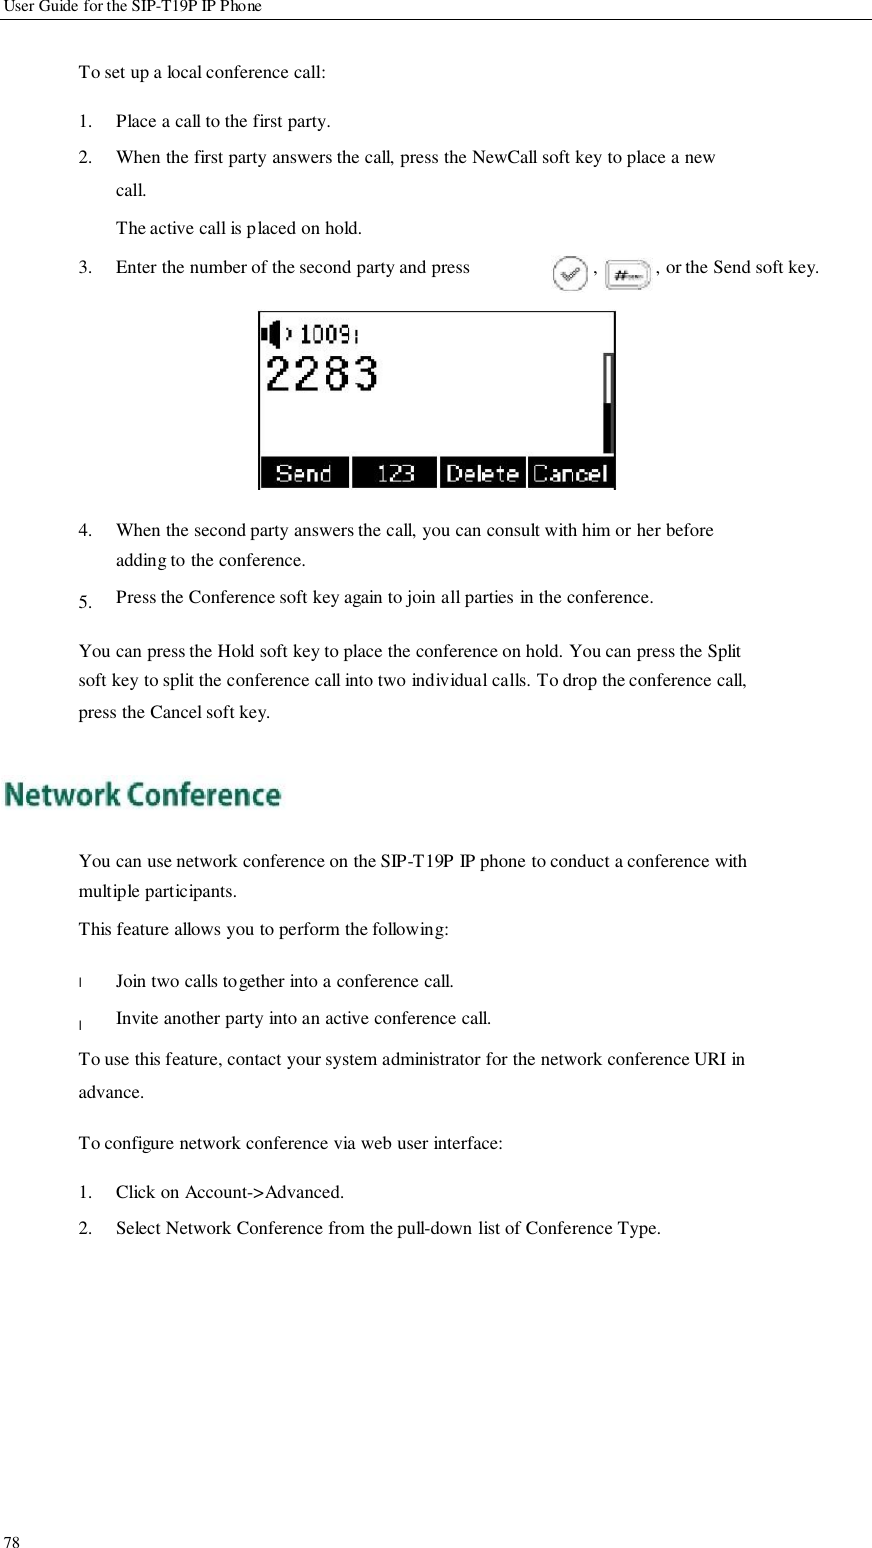             User Guide for the SIP-T19P IP Phone   To set up a local conference call:  1. 2.  Place a call to the first party. When the first party answers the call, press the NewCall soft key to place a new call. The active call is placed on hold. 3.  Enter the number of the second party and press  ,  , or the Send soft key.            4.   5.            When the second party answers the call, you can consult with him or her before adding to the conference. Press the Conference soft key again to join all parties in the conference.  You can press the Hold soft key to place the conference on hold. You can press the Split soft key to split the conference call into two individual calls. To drop the conference call, press the Cancel soft key.      You can use network conference on the SIP-T19P IP phone to conduct a conference with multiple participants. This feature allows you to perform the following:  l  l  Join two calls together into a conference call. Invite another party into an active conference call. To use this feature, contact your system administrator for the network conference URI in advance.  To configure network conference via web user interface:                   78  1. 2.  Click on Account-&gt;Advanced. Select Network Conference from the pull-down list of Conference Type.